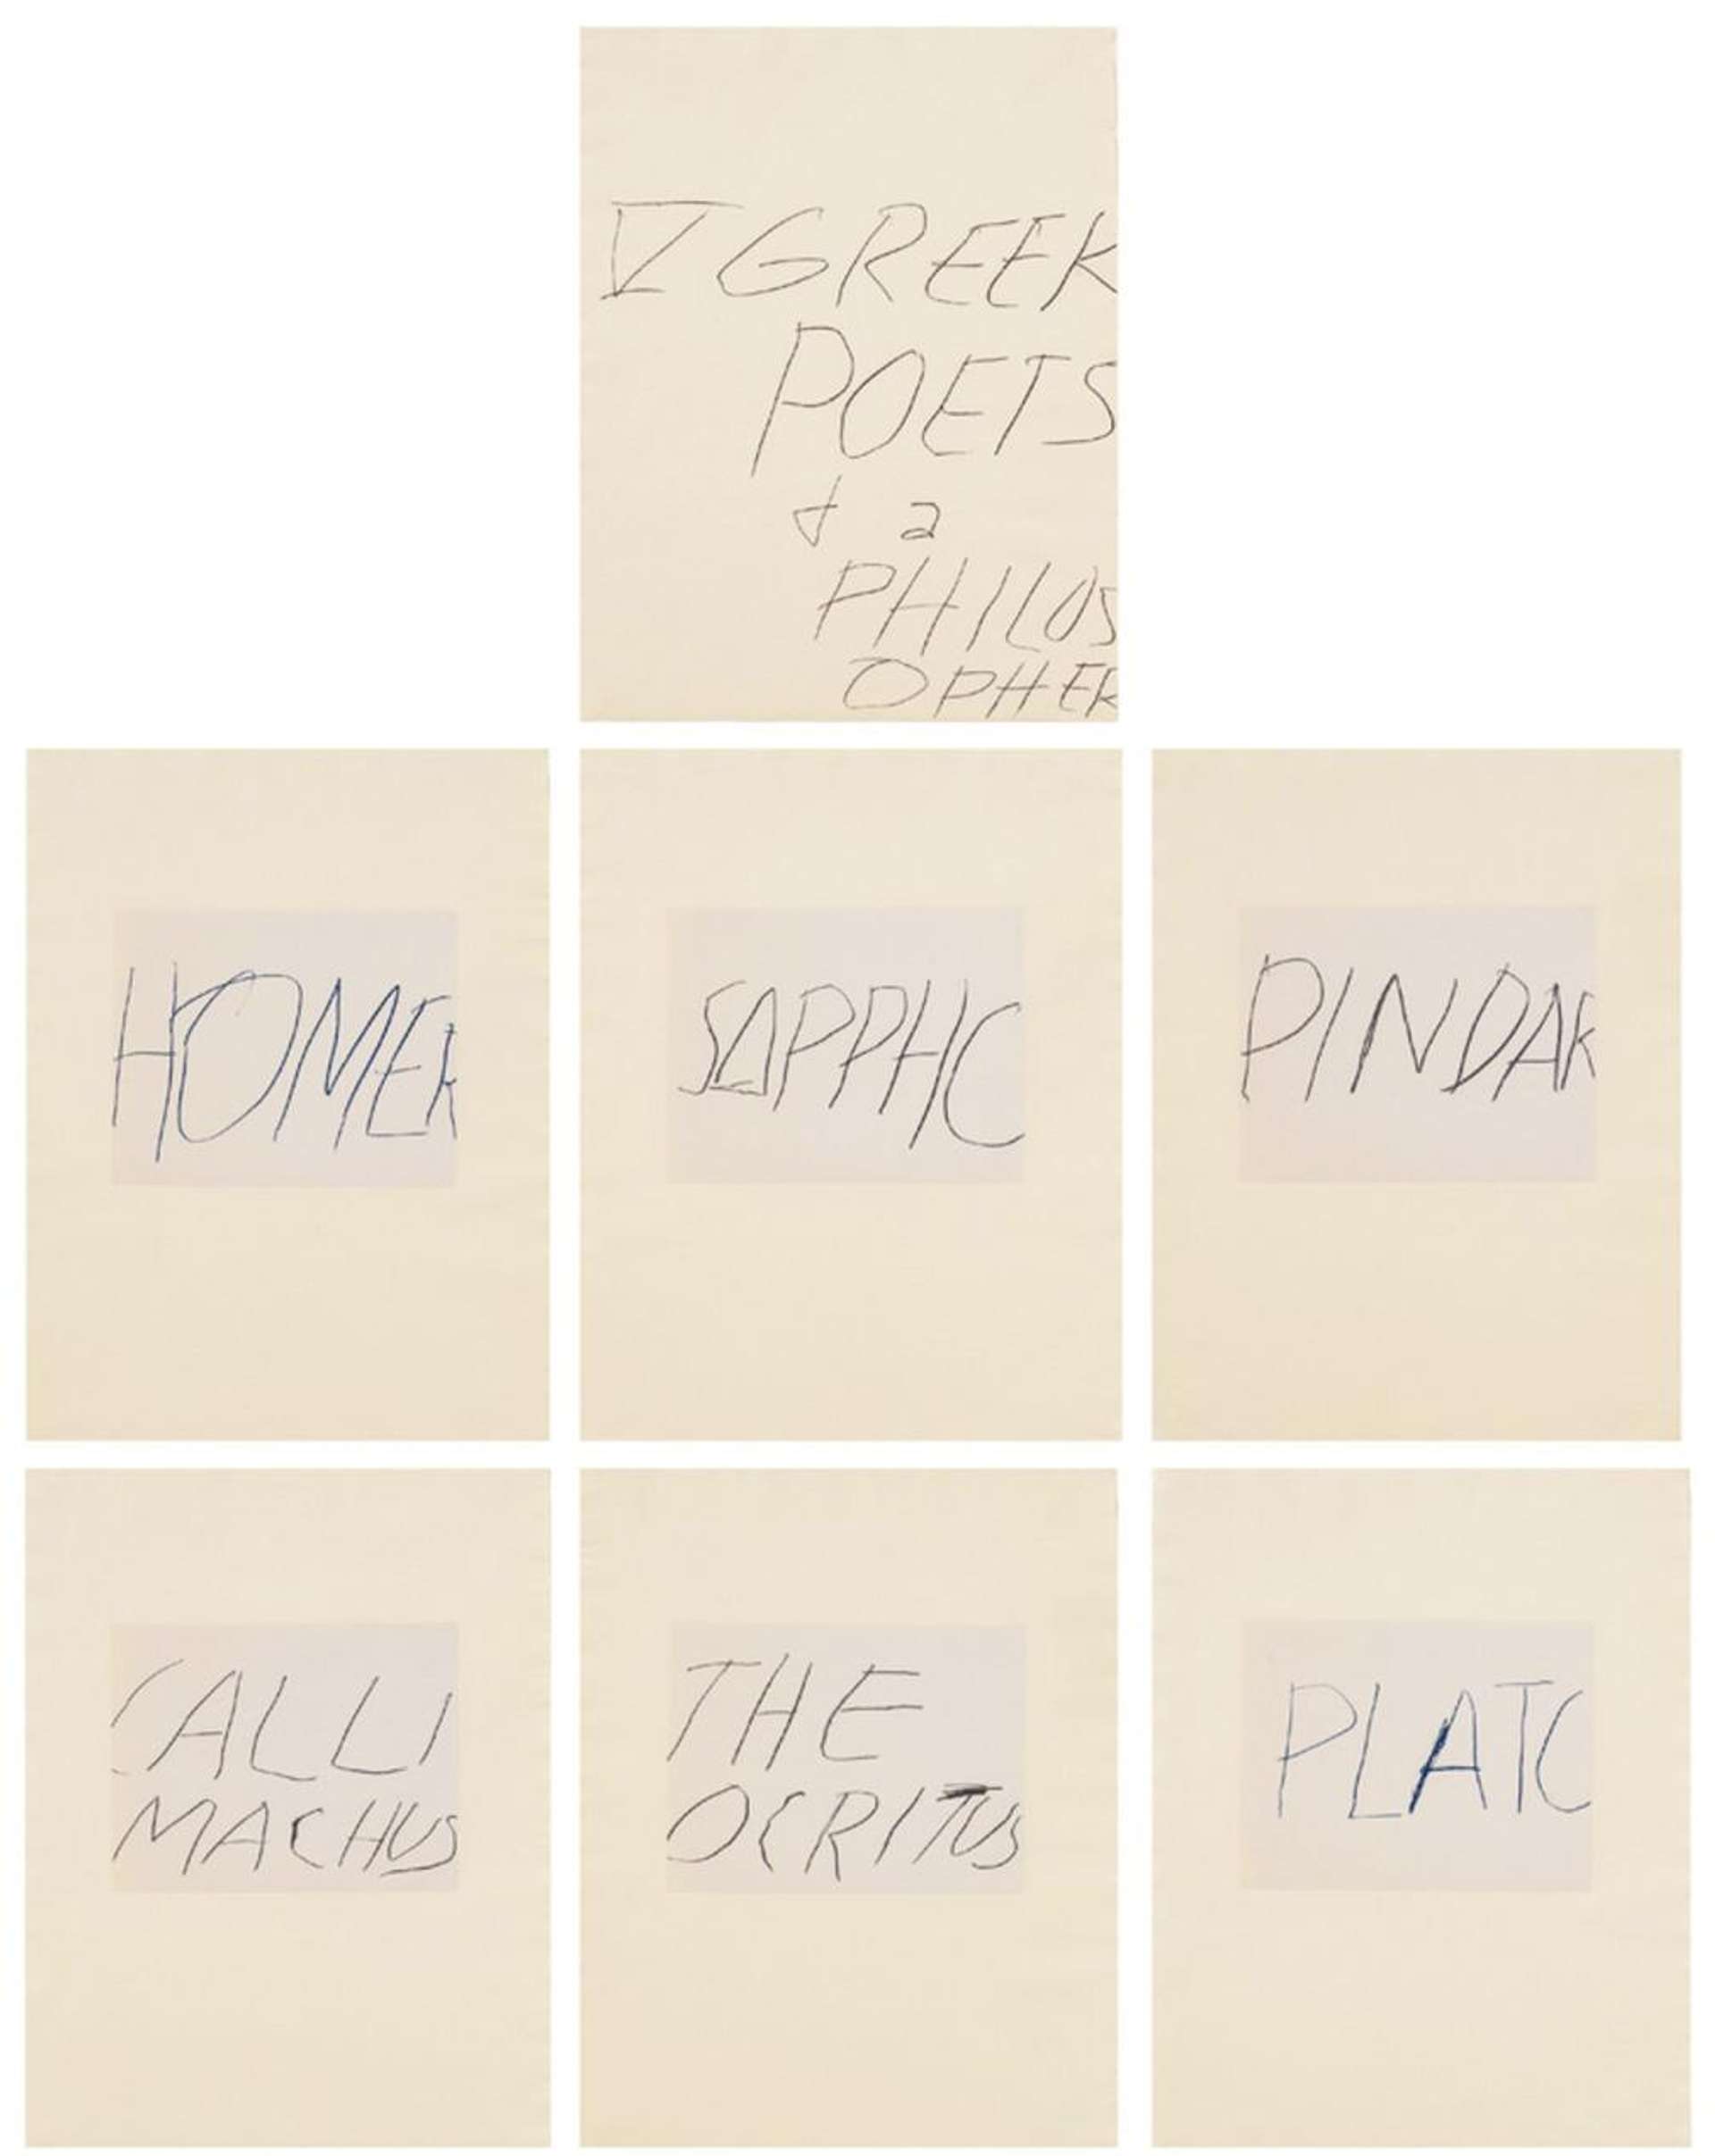 Five Greek Poets And A Philosopher (complete set) - Signed Print by Cy Twombly 1978 - MyArtBroker